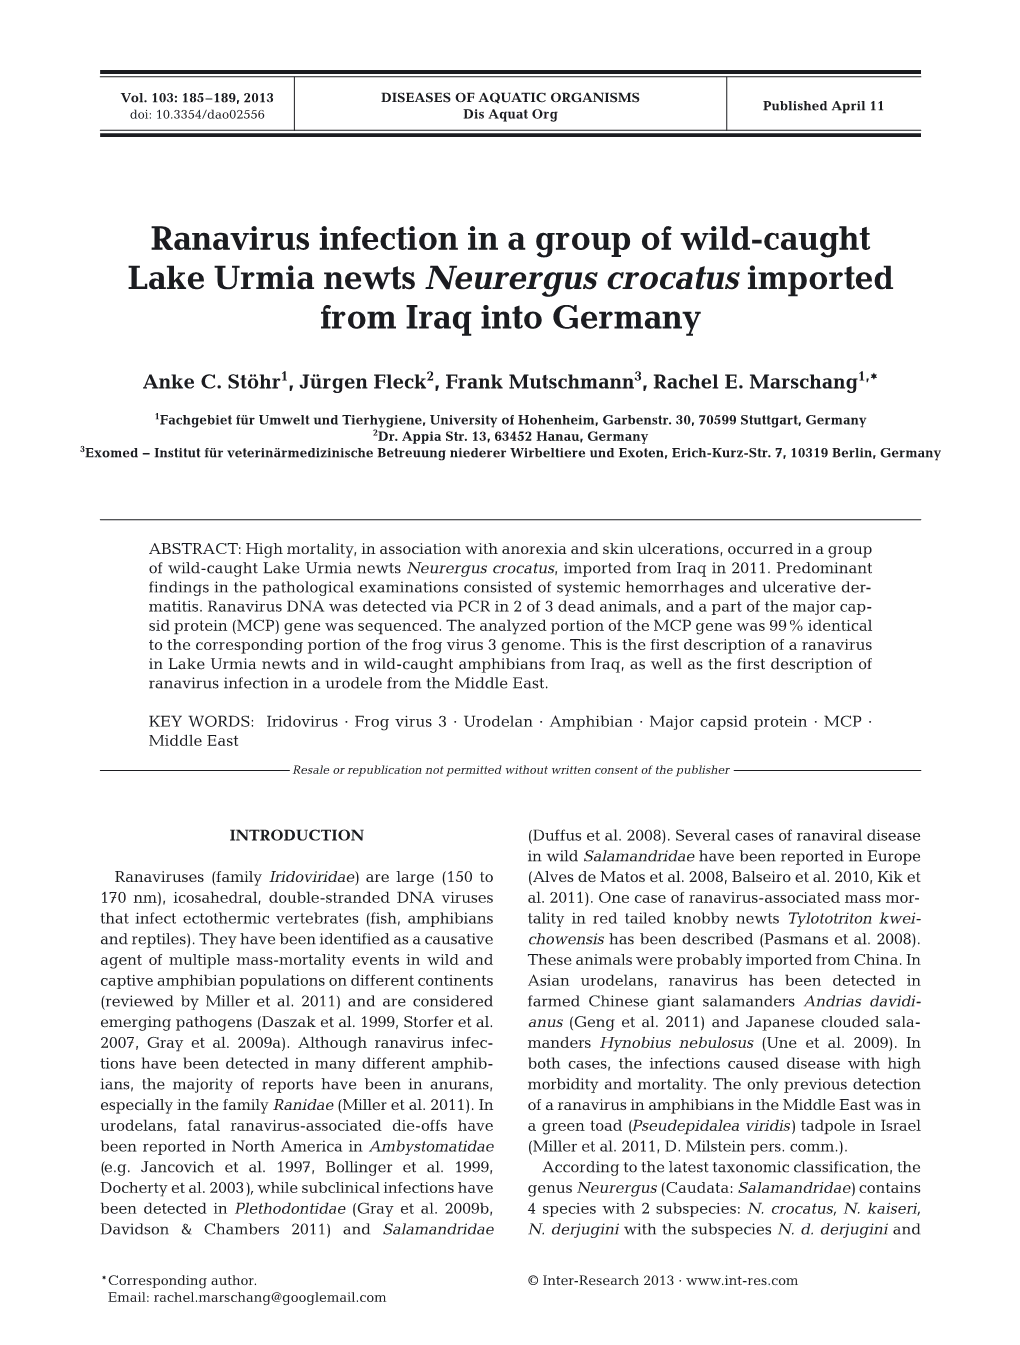 Ranavirus Infection in a Group of Wild-Caught Lake Urmia Newts Neurergus Crocatus Imported from Iraq Into Germany